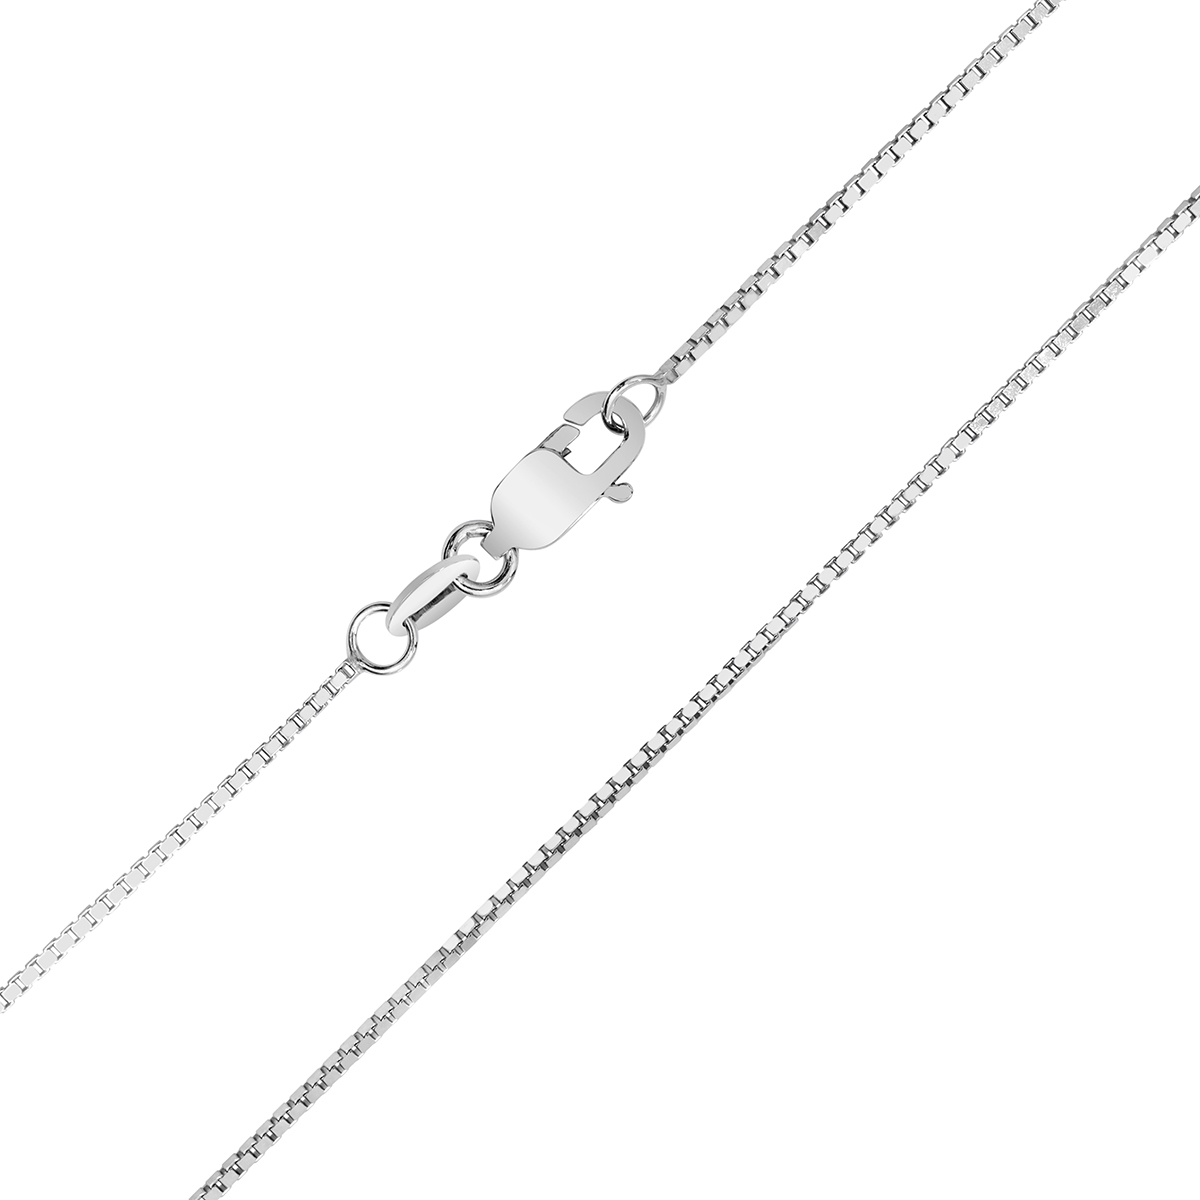 10K White Gold 0.8mm Box Chain with Lobster Clasp - 18 Inch